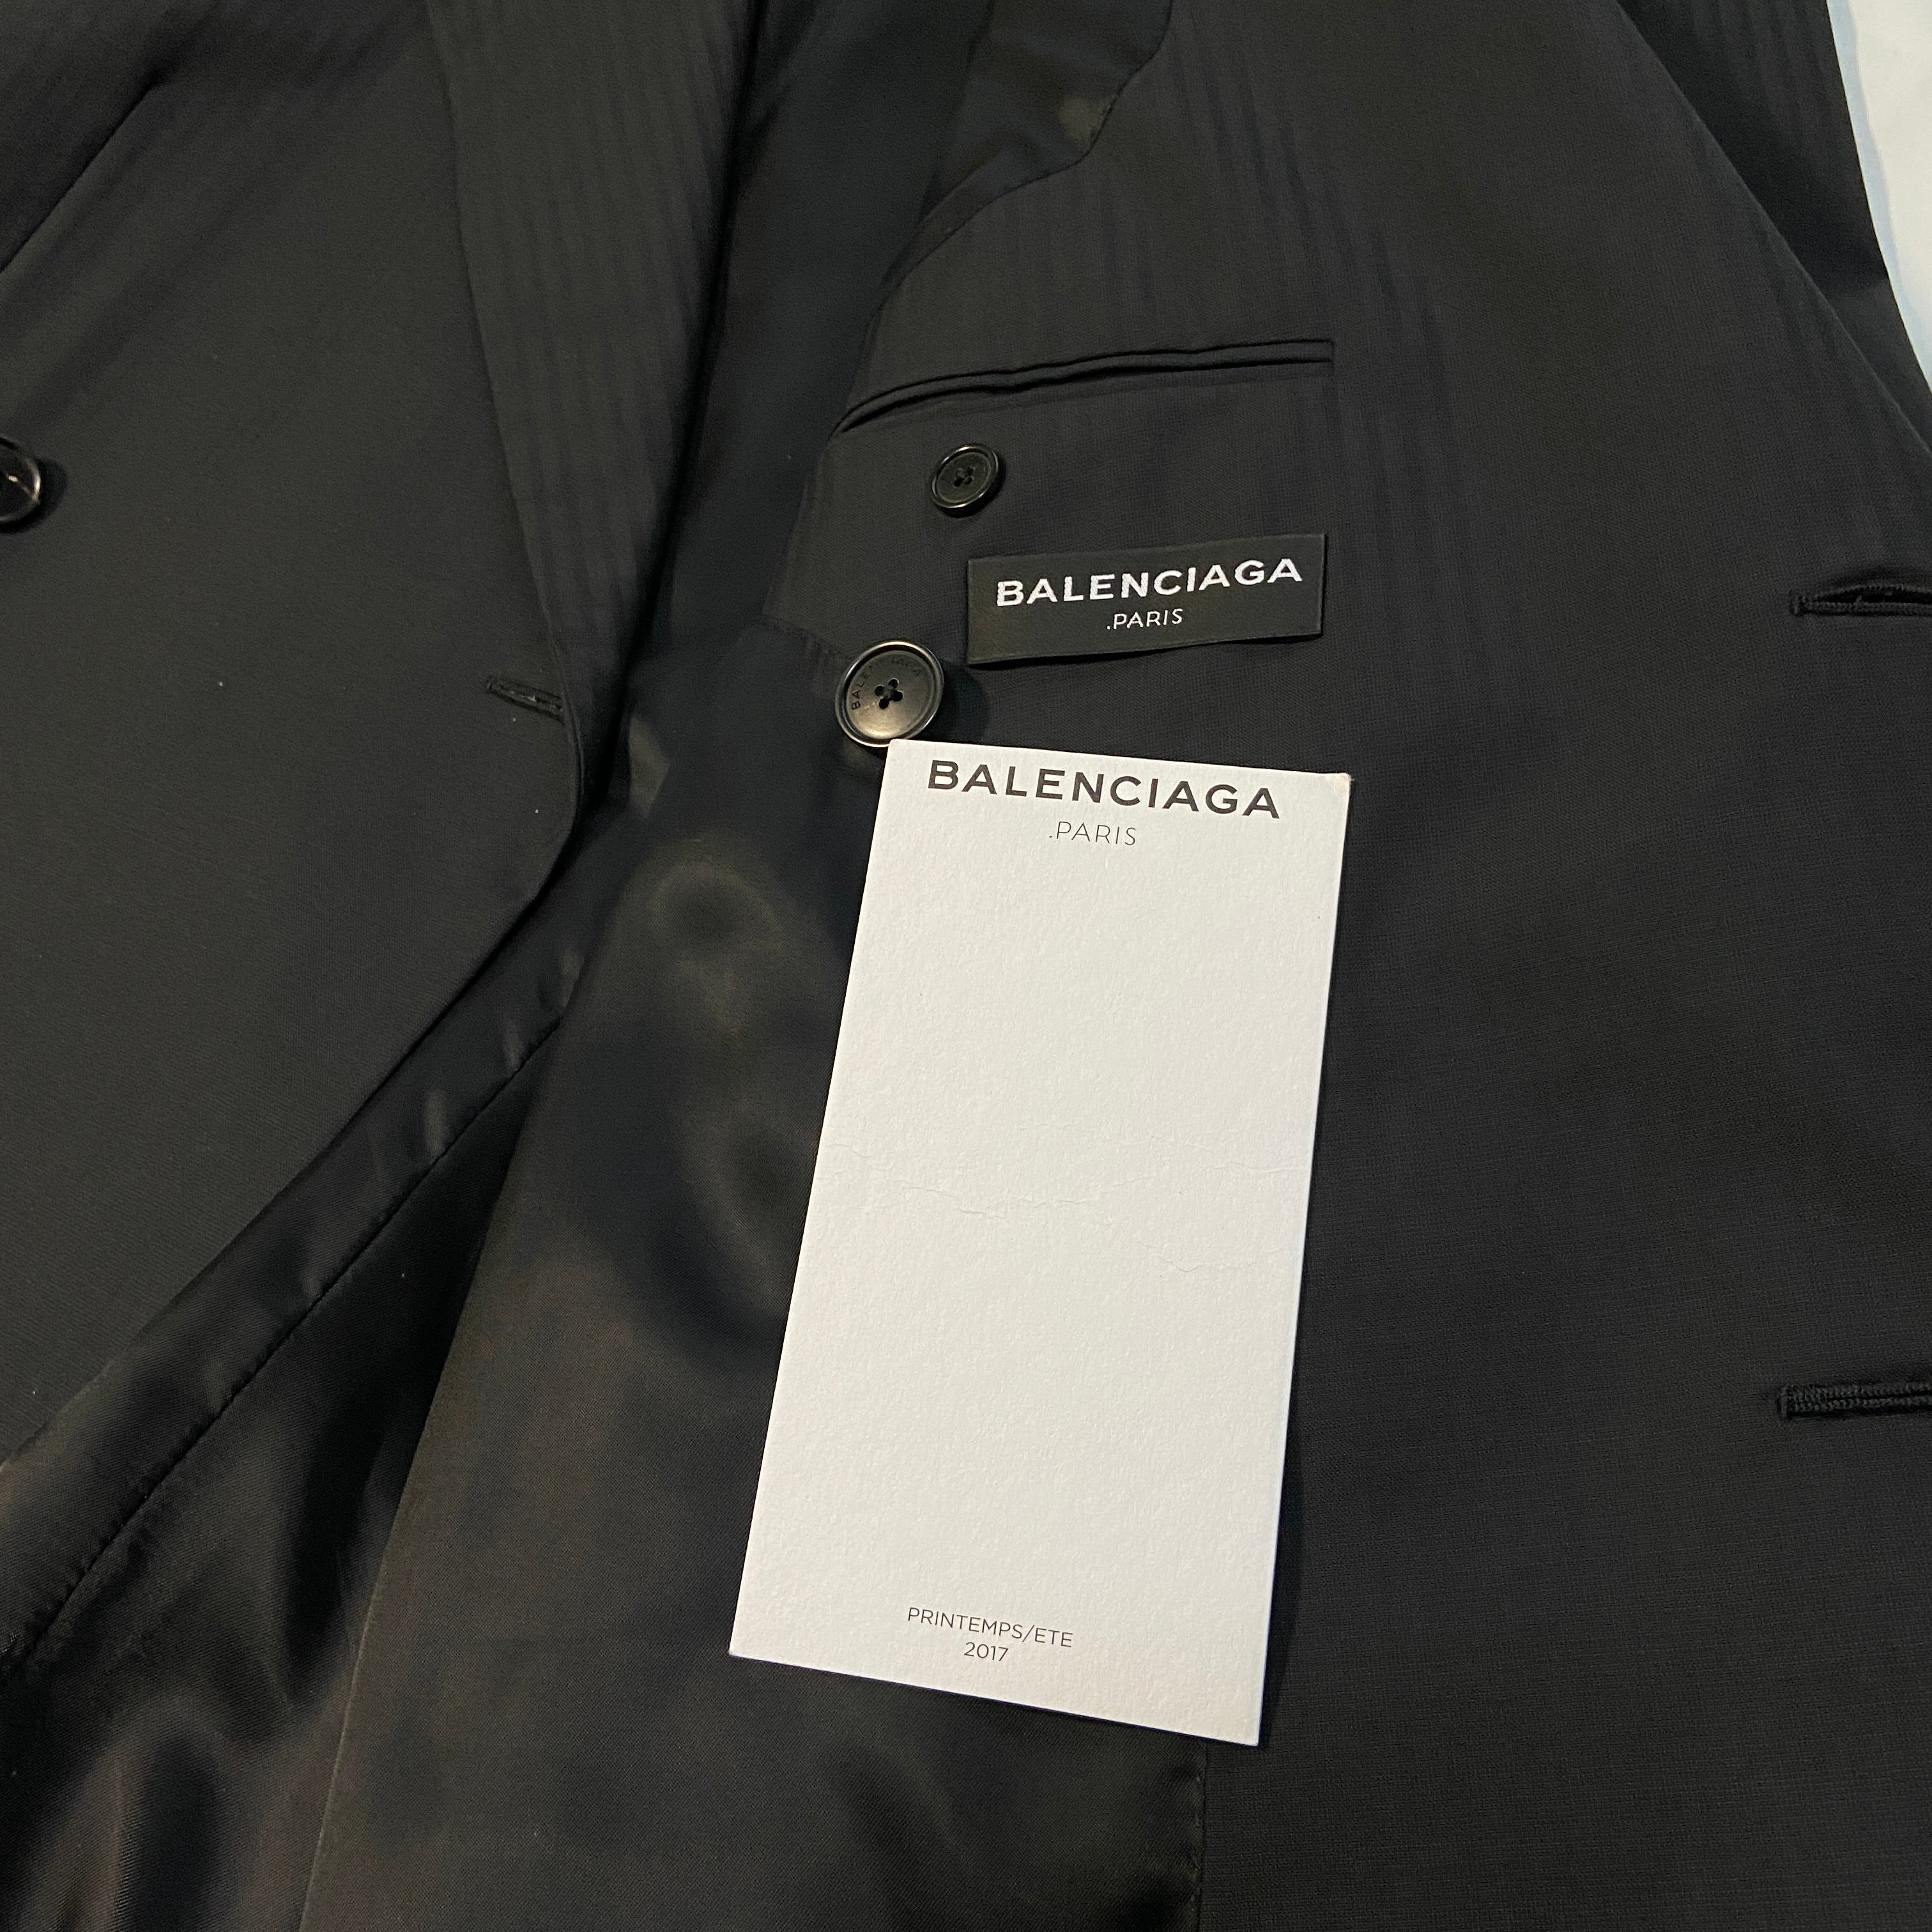 Balenciaga ss17 Double breasted coat with Shrunk shoulder padding